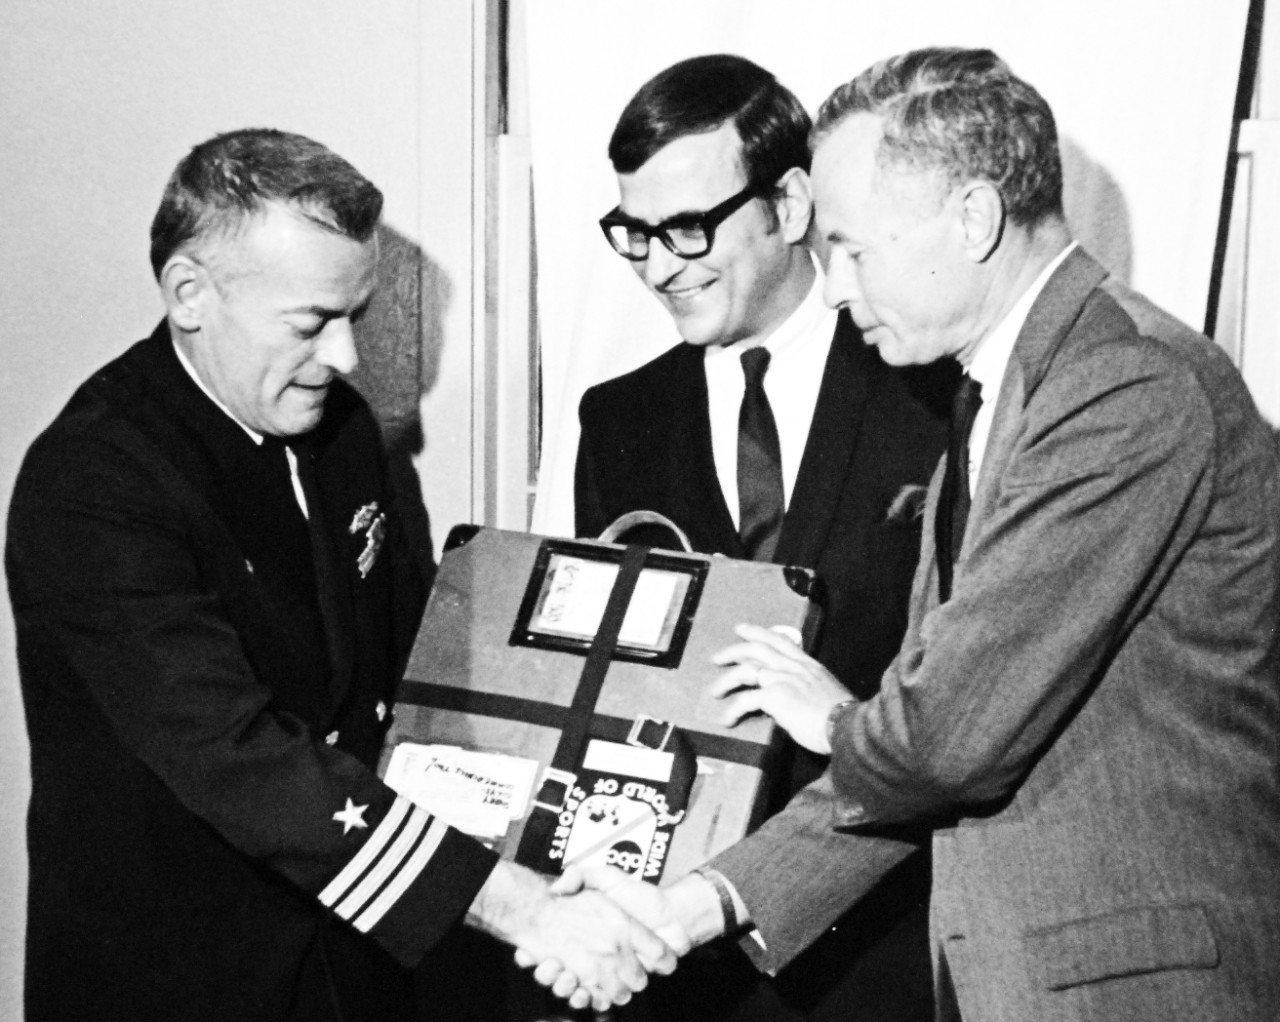 428-GX-USN-1140158:   U.S. Naval Air Station, North Island, California, February 6, 1969.    Commander Lloyd M. Bucher, Commanding Officer of USS Pueblo (AGER-2) receives a gift from the American Broadcasting Company’s “Wide World of Sports” program personnel during a party.  Official U.S. Navy Photograph, now in the collections of the National Archives (2017/05/23).  Photographed from reference card. 